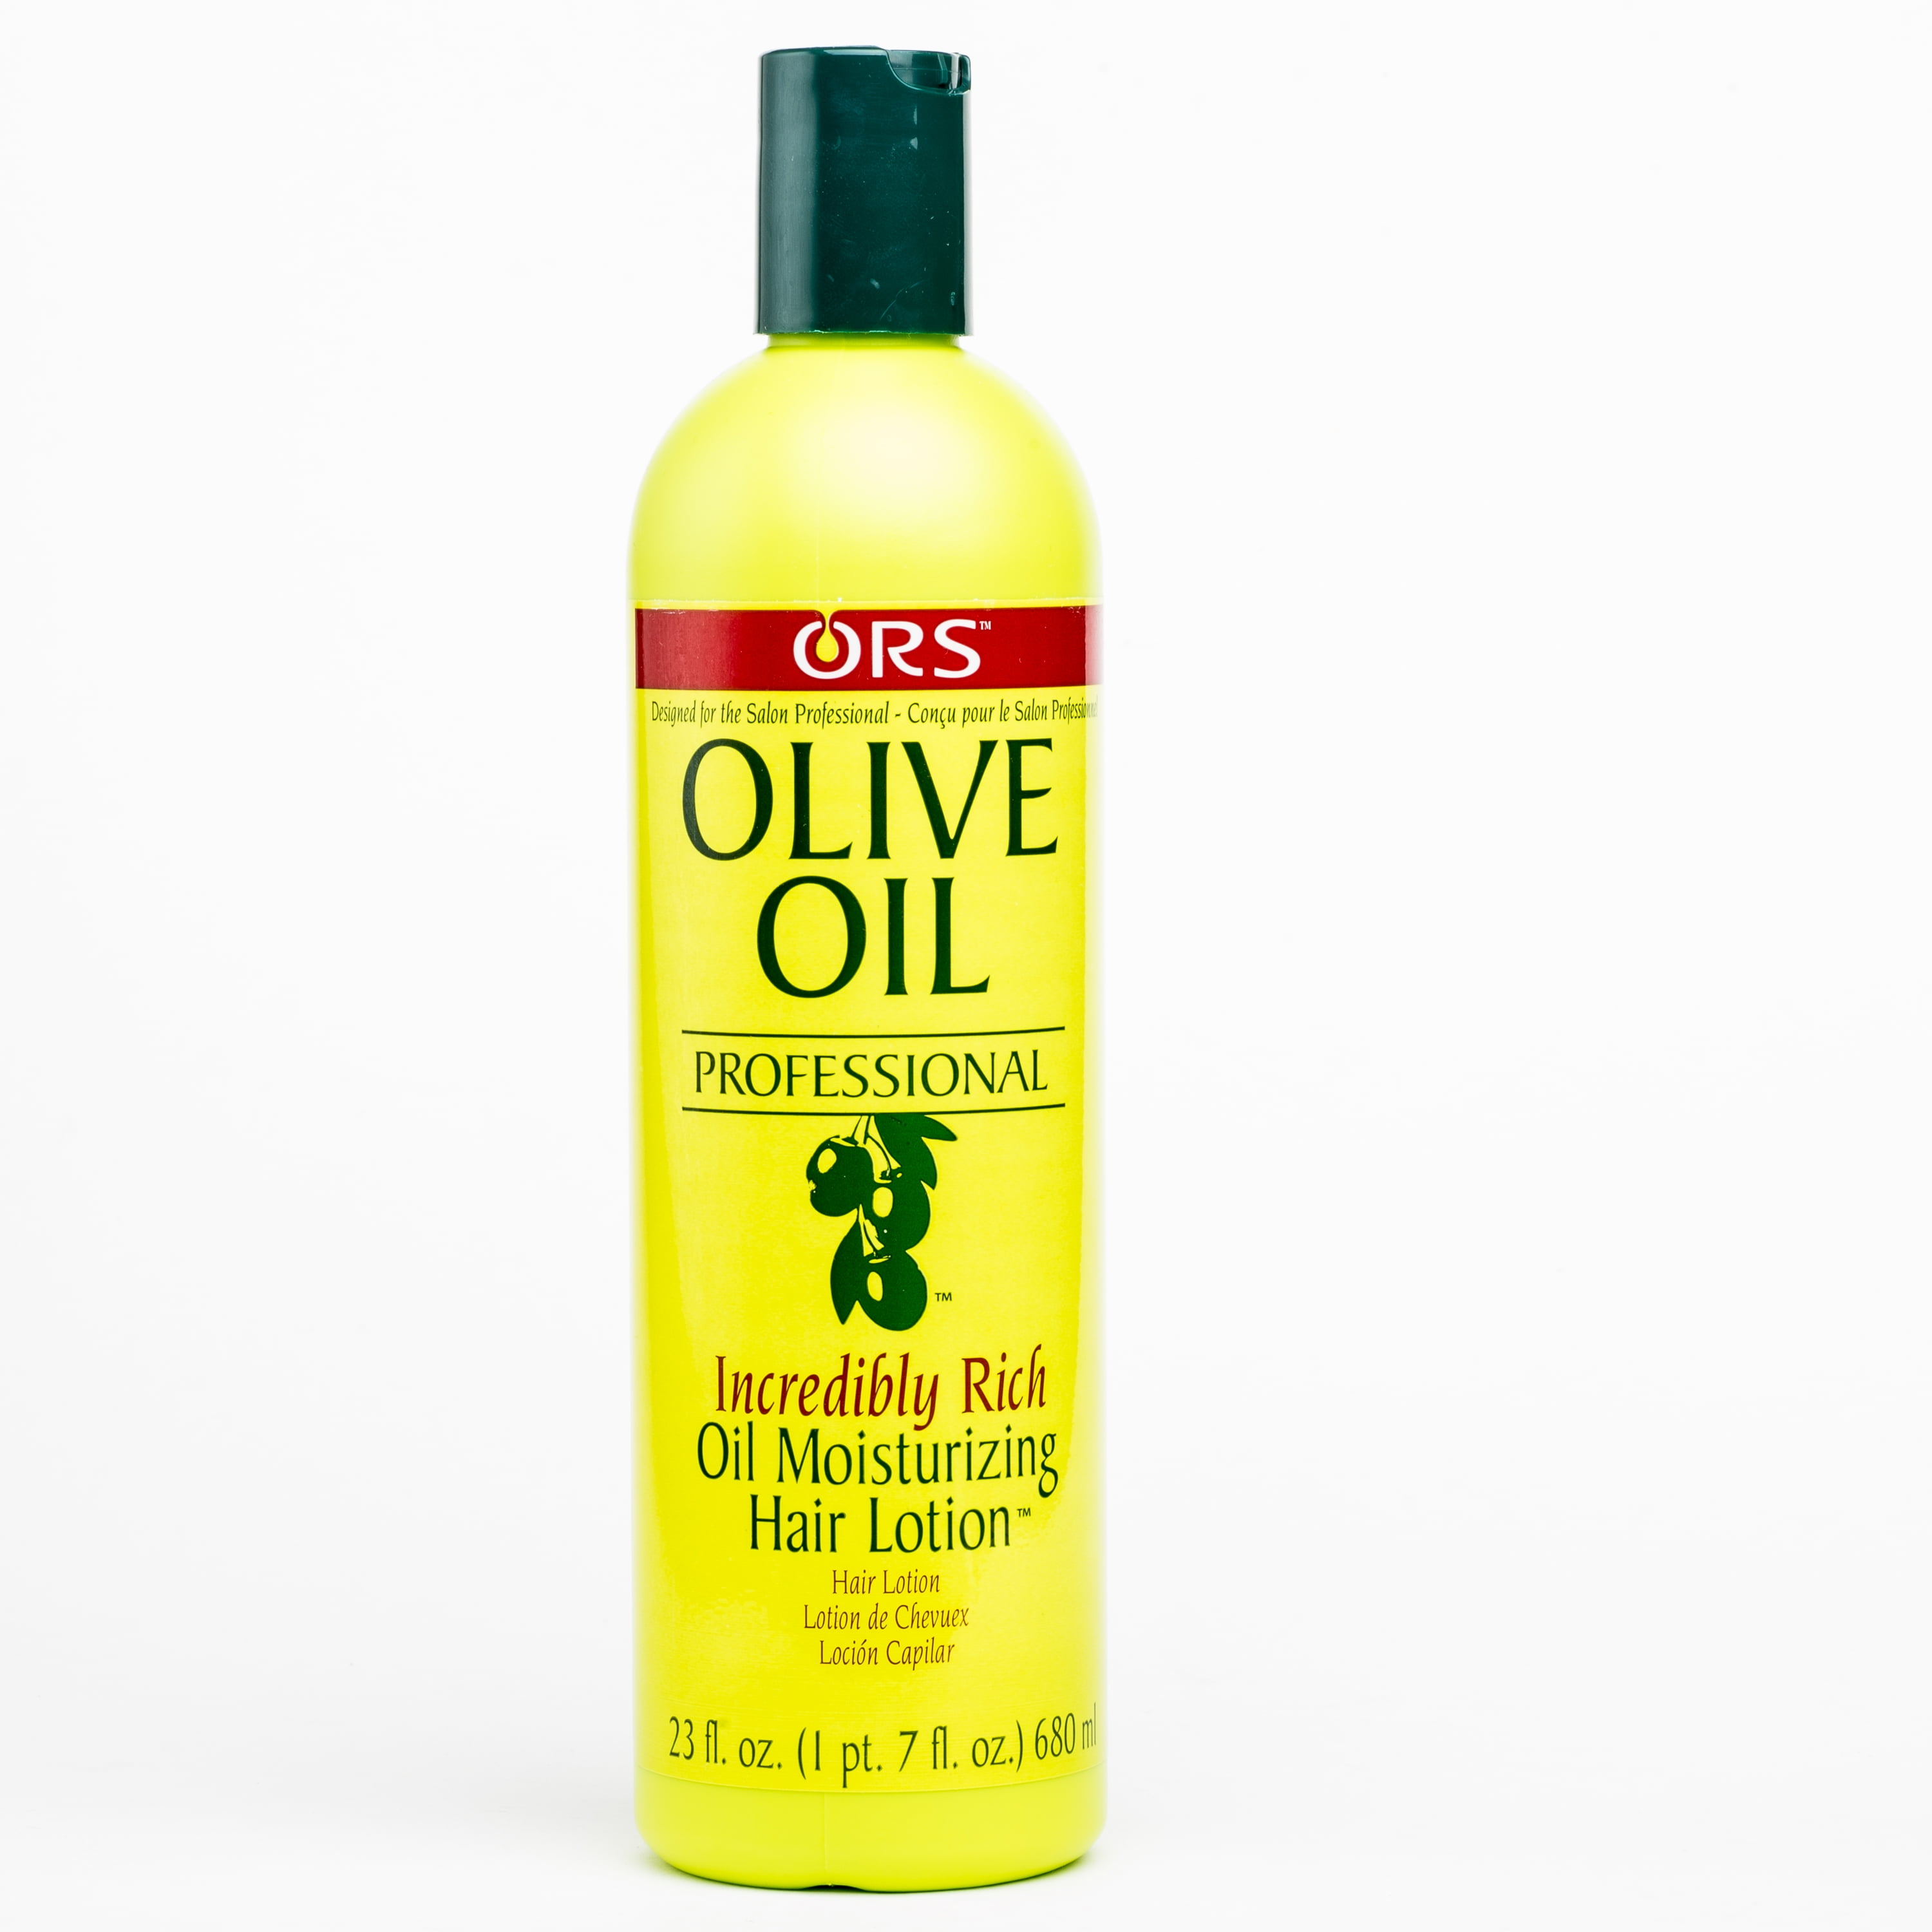 ORS Olive Oil Professional Incredibly Rich Oil Moisturizing Hair Lotion ...